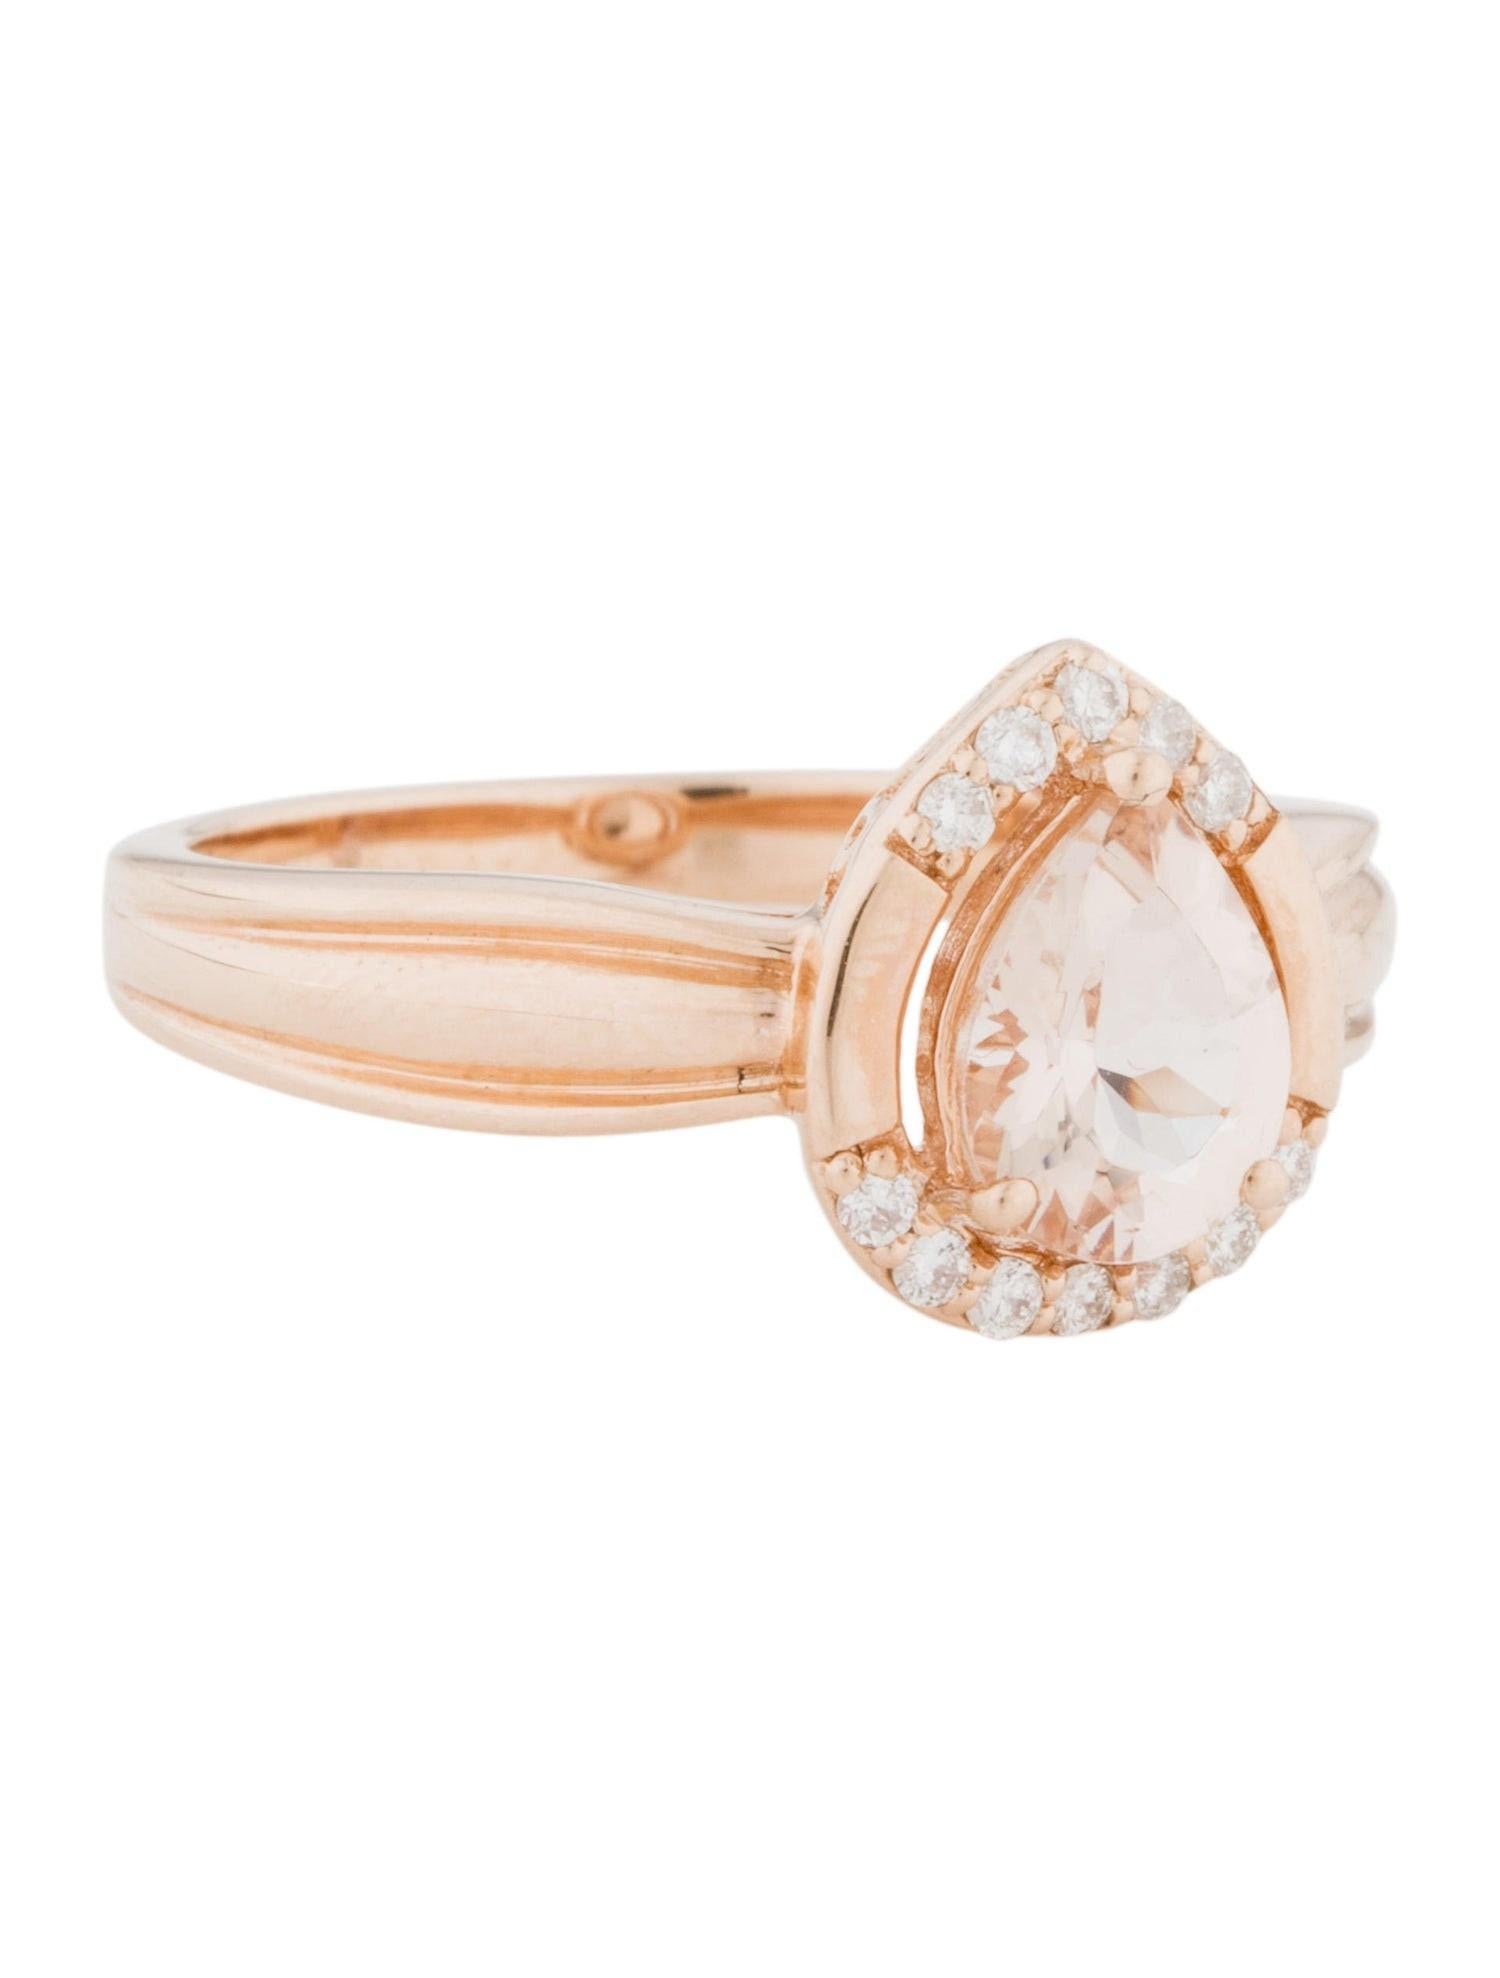 This is a delicate pear-shaped natural morganite and diamond ring set in solid 14K rose gold. This ring features a stunning natural 0.88 Ct pear-cut morganite stone with excellent peachy pink color (AAA quality gem) and is surrounded by a half halo